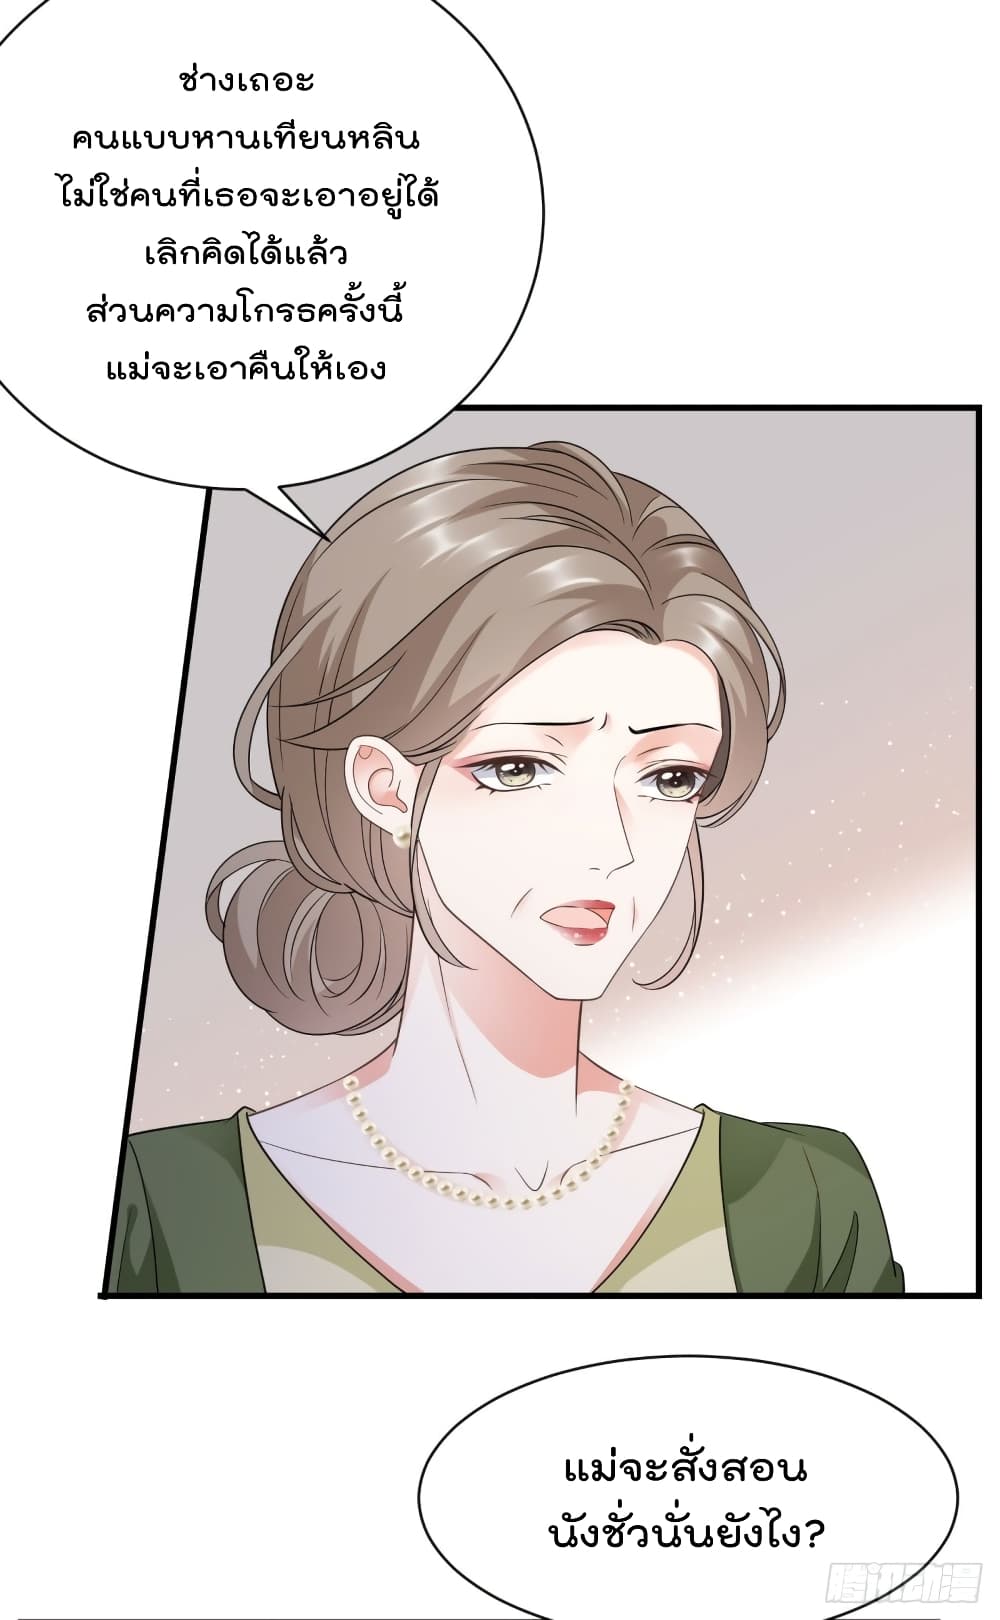 What Can the Eldest Lady Have คุณหนูใหญ่ ทำไมคุณร้ายอย่างนี้ 25-25